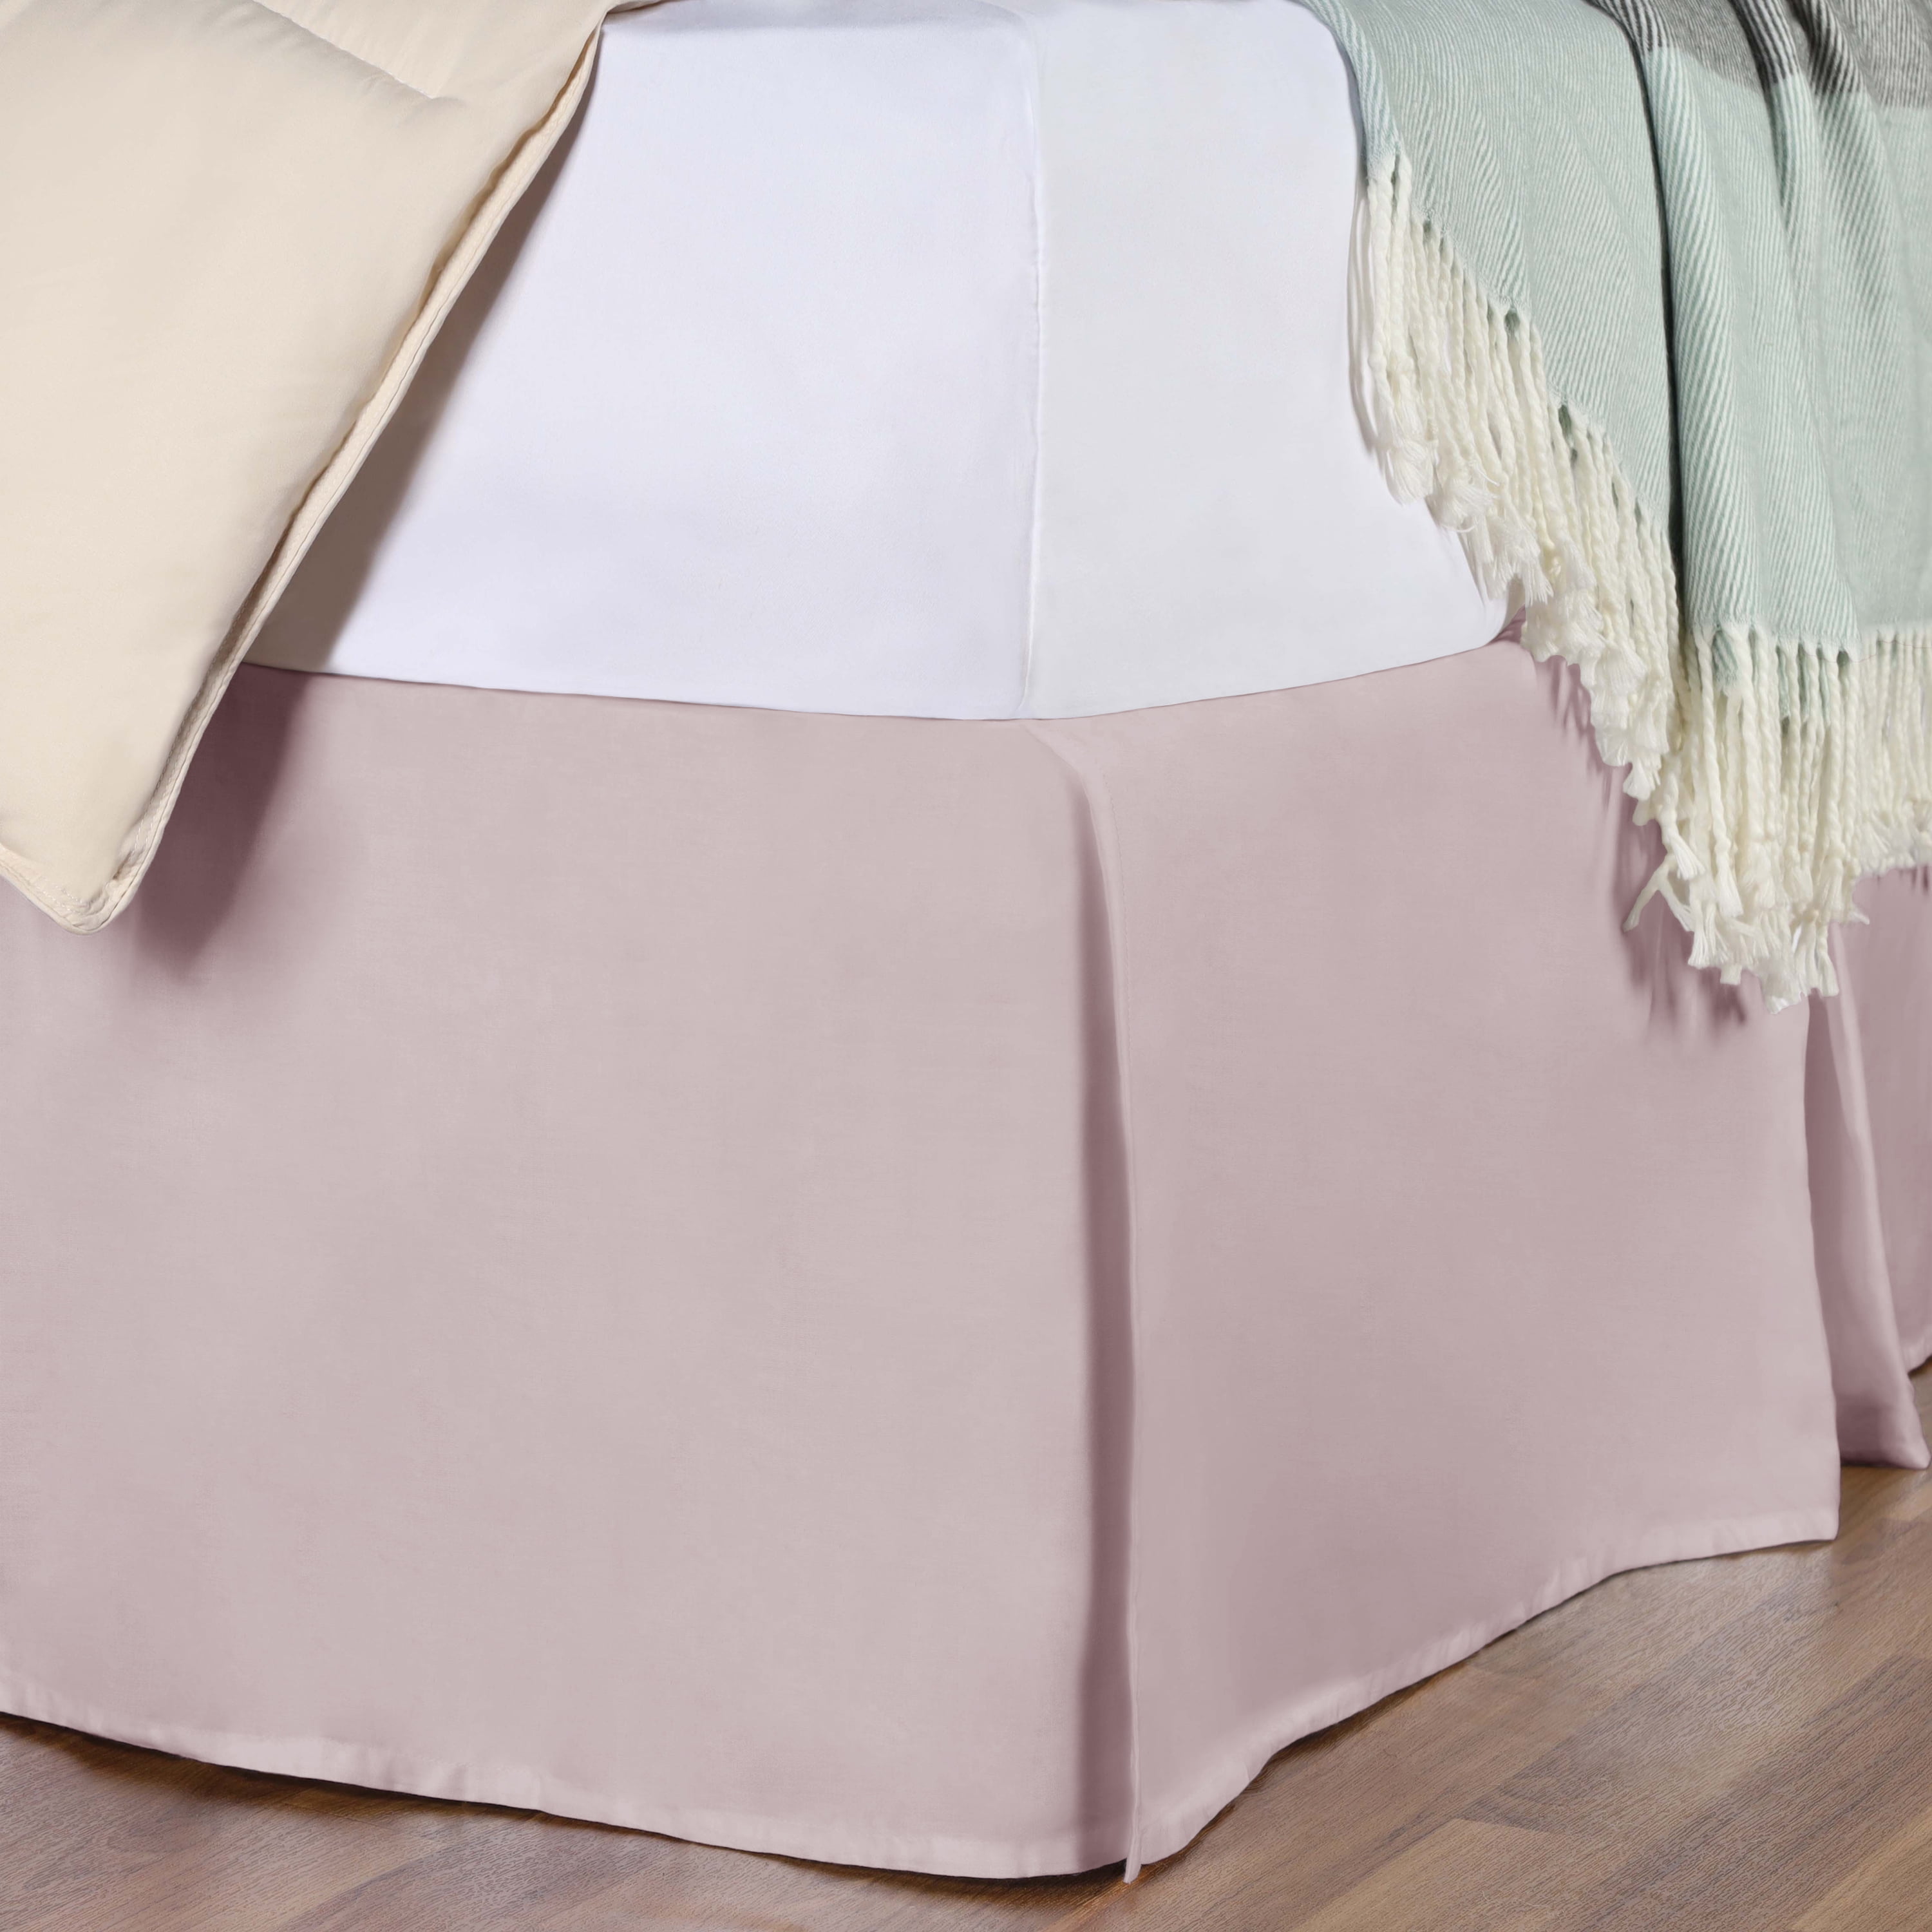 Details about   New Chaps Damask Stripe Bed Skirt Drop 15 in Choose Size And Color 